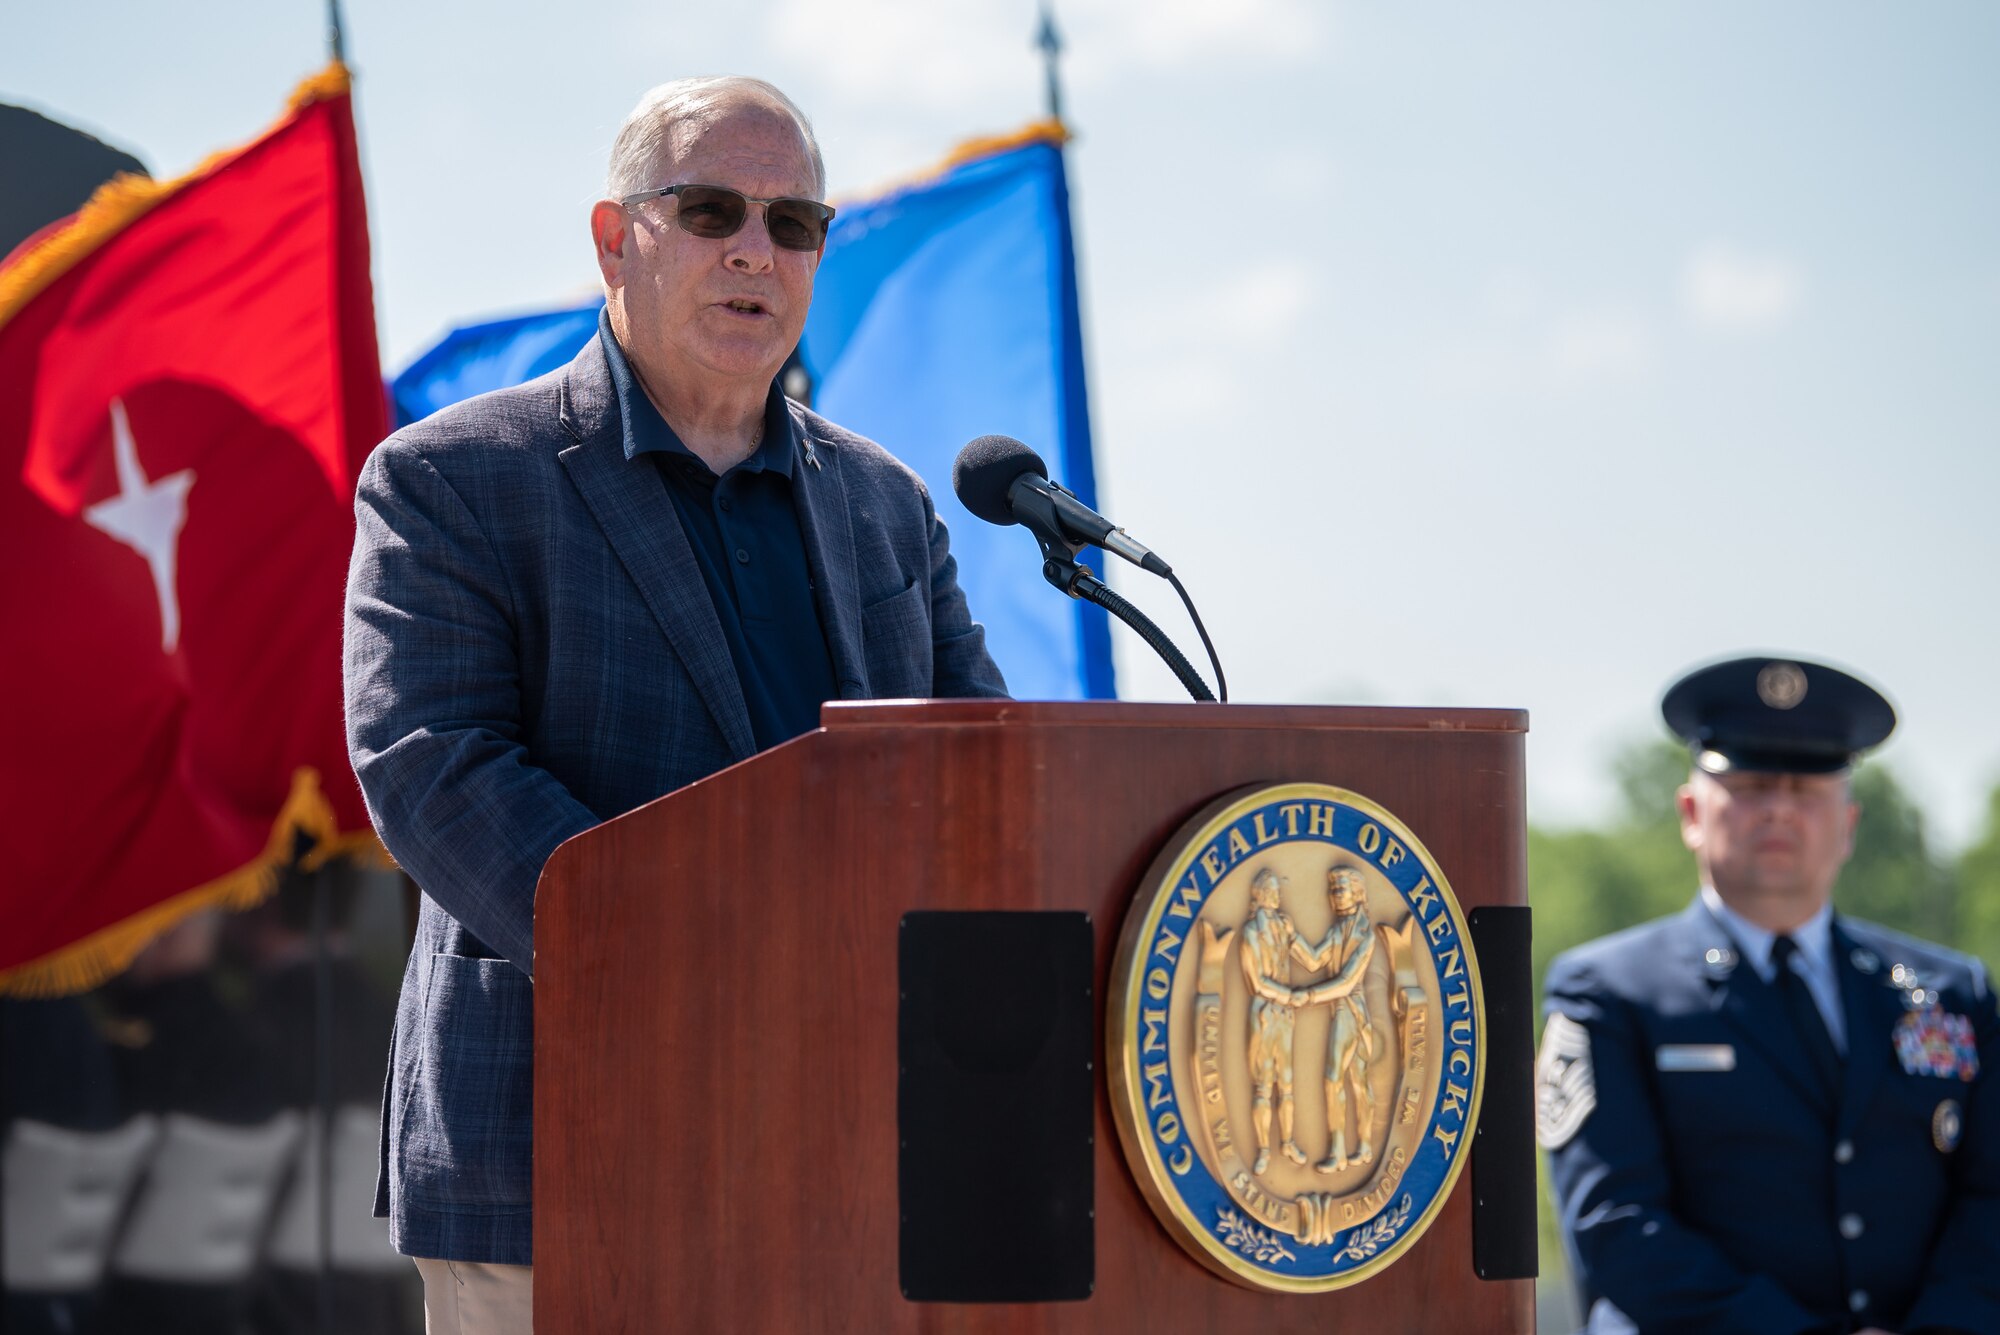 Army Brig. Gen. Benjamin F. Adams III (retired), former assistant adjutant general for Army and chairman of the Kentucky National Guard Memorial Fund Inc. reads the names of 13 fallen Soldiers who were added to the memorial this year during a ceremony at Boone National Guard Center in Frankfort, Ky., May 30, 2022. Of the 13 names being added, 11 were killed during World War I, one in 1935 during weekend training, and another in 2001 just prior to 9/11. The monument now honors 286 Solders and Airmen from the Kentucky Guard who have paid the ultimate price for freedom since 1912. (U.S. Air National Guard photo by Dale Greer)